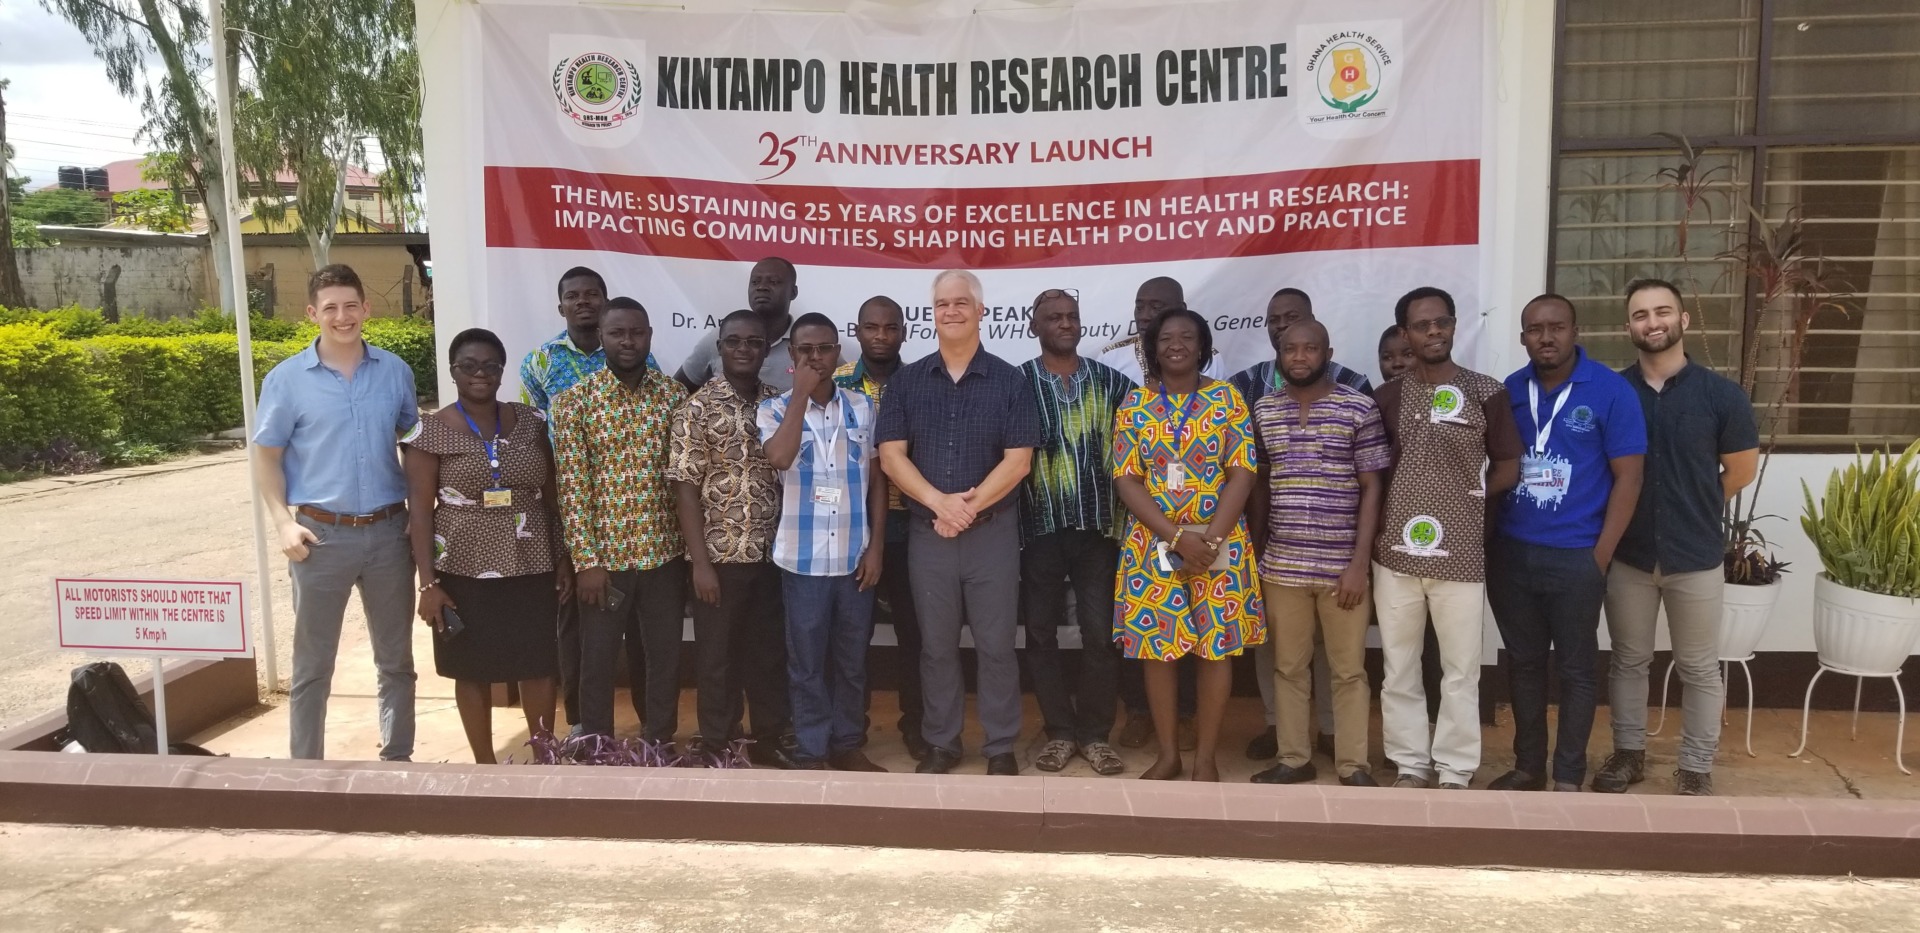 Researcher and local people at Kintampo Health Research Centre in Ghana